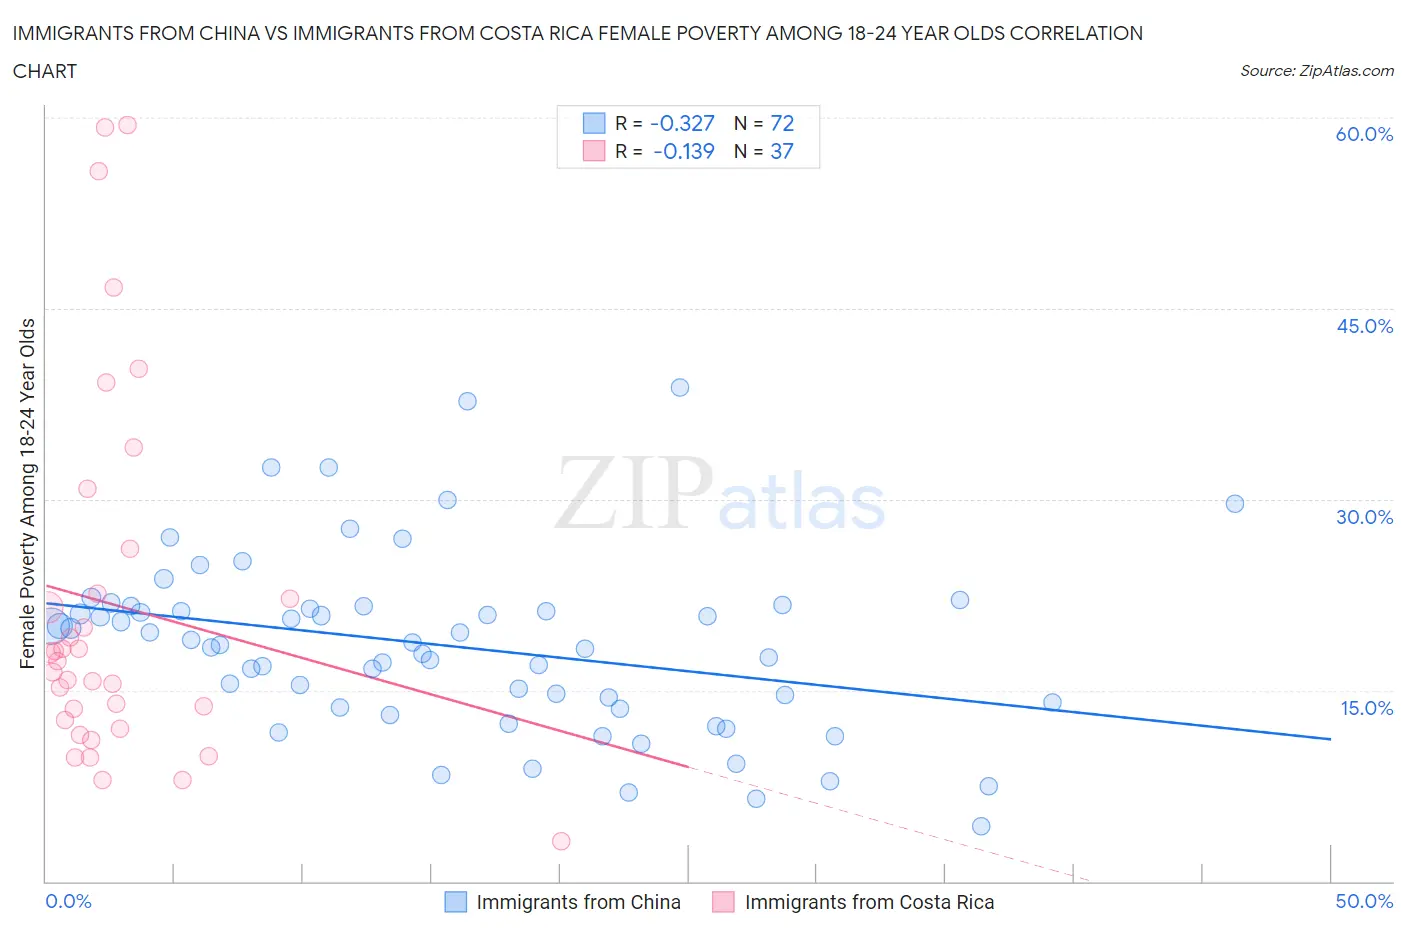 Immigrants from China vs Immigrants from Costa Rica Female Poverty Among 18-24 Year Olds